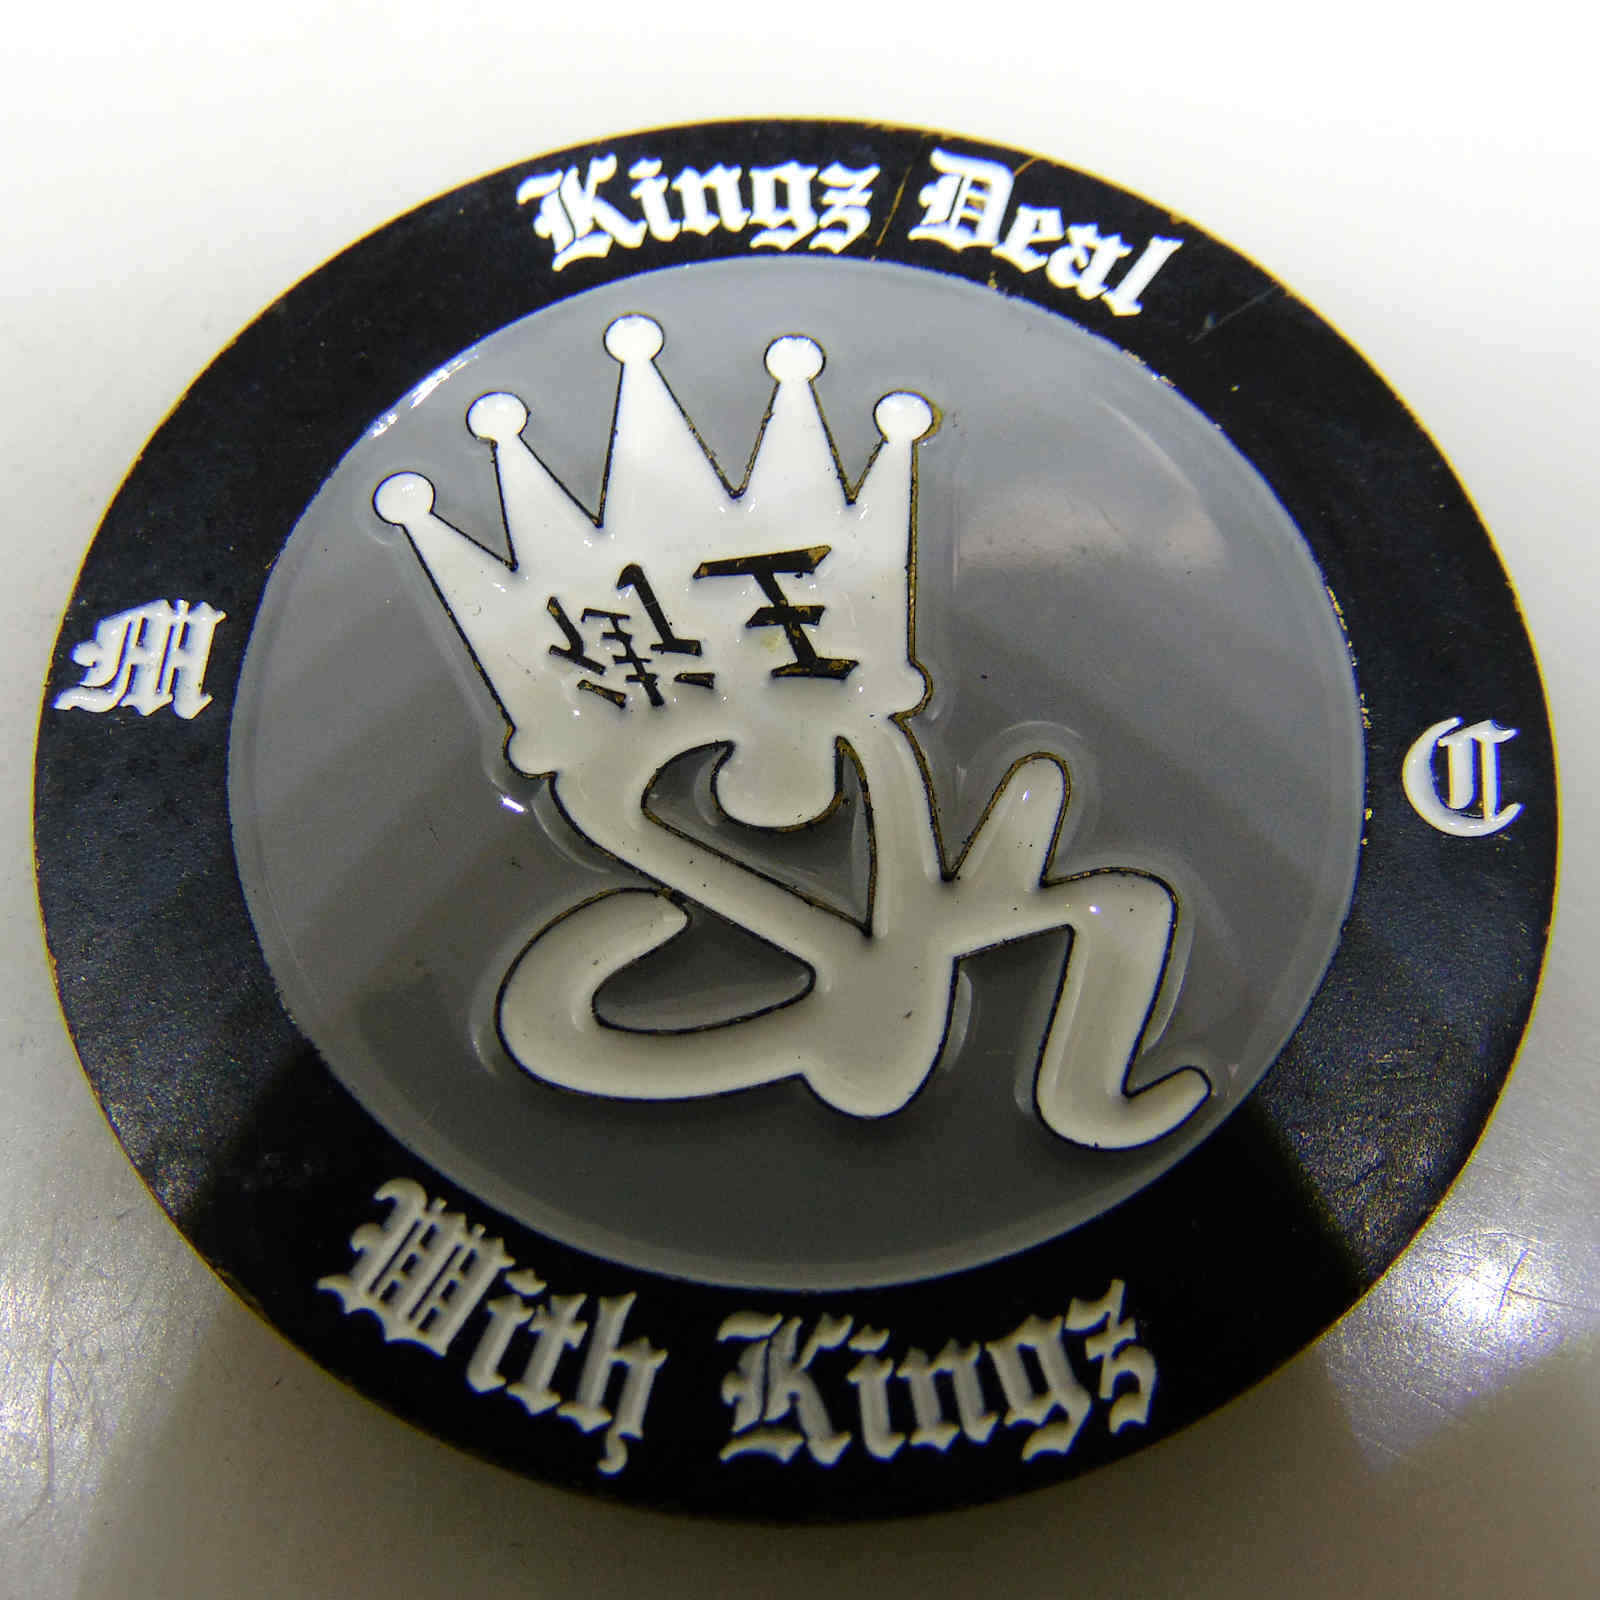 KINGS DEAL WITH KINGS CHALLENGE COIN